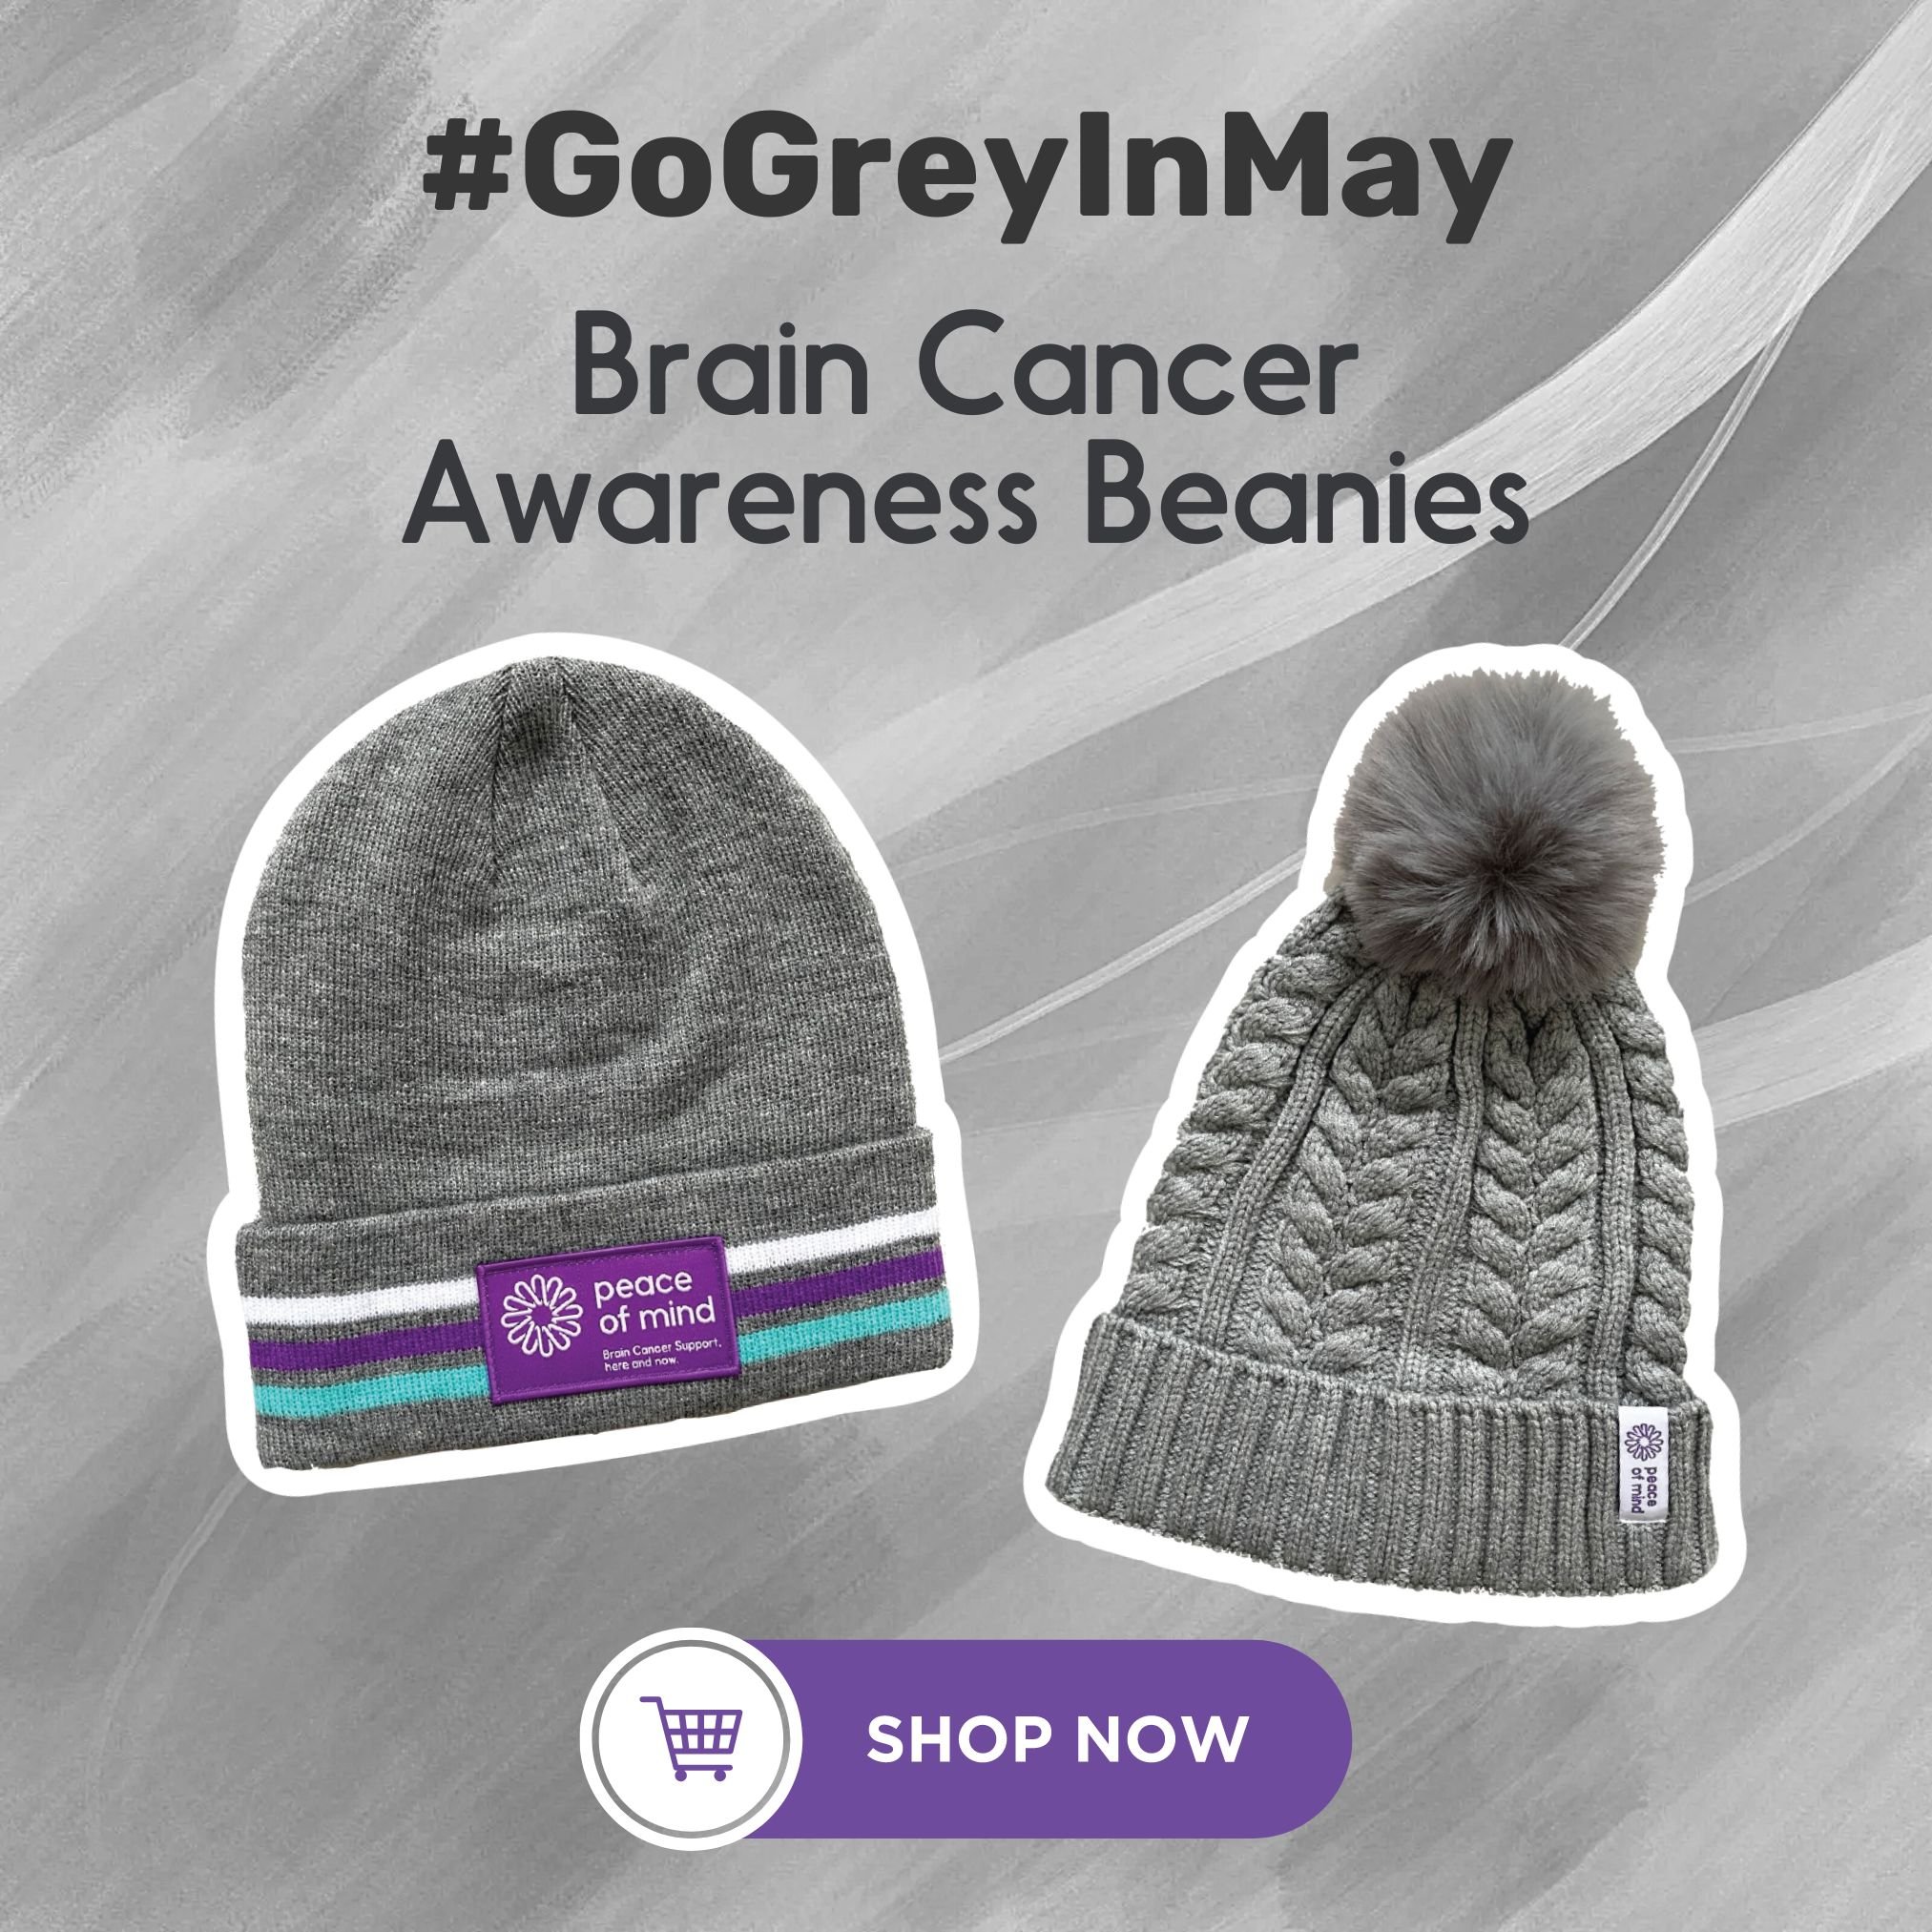 Help Peace of Mind Foundation this May by purchasing one of our brain cancer awareness beanies! 100% of all proceeds go directly towards funding our support programs for patients, carers, and families affected by a brain tumour diagnosis. #GoGreyInMa